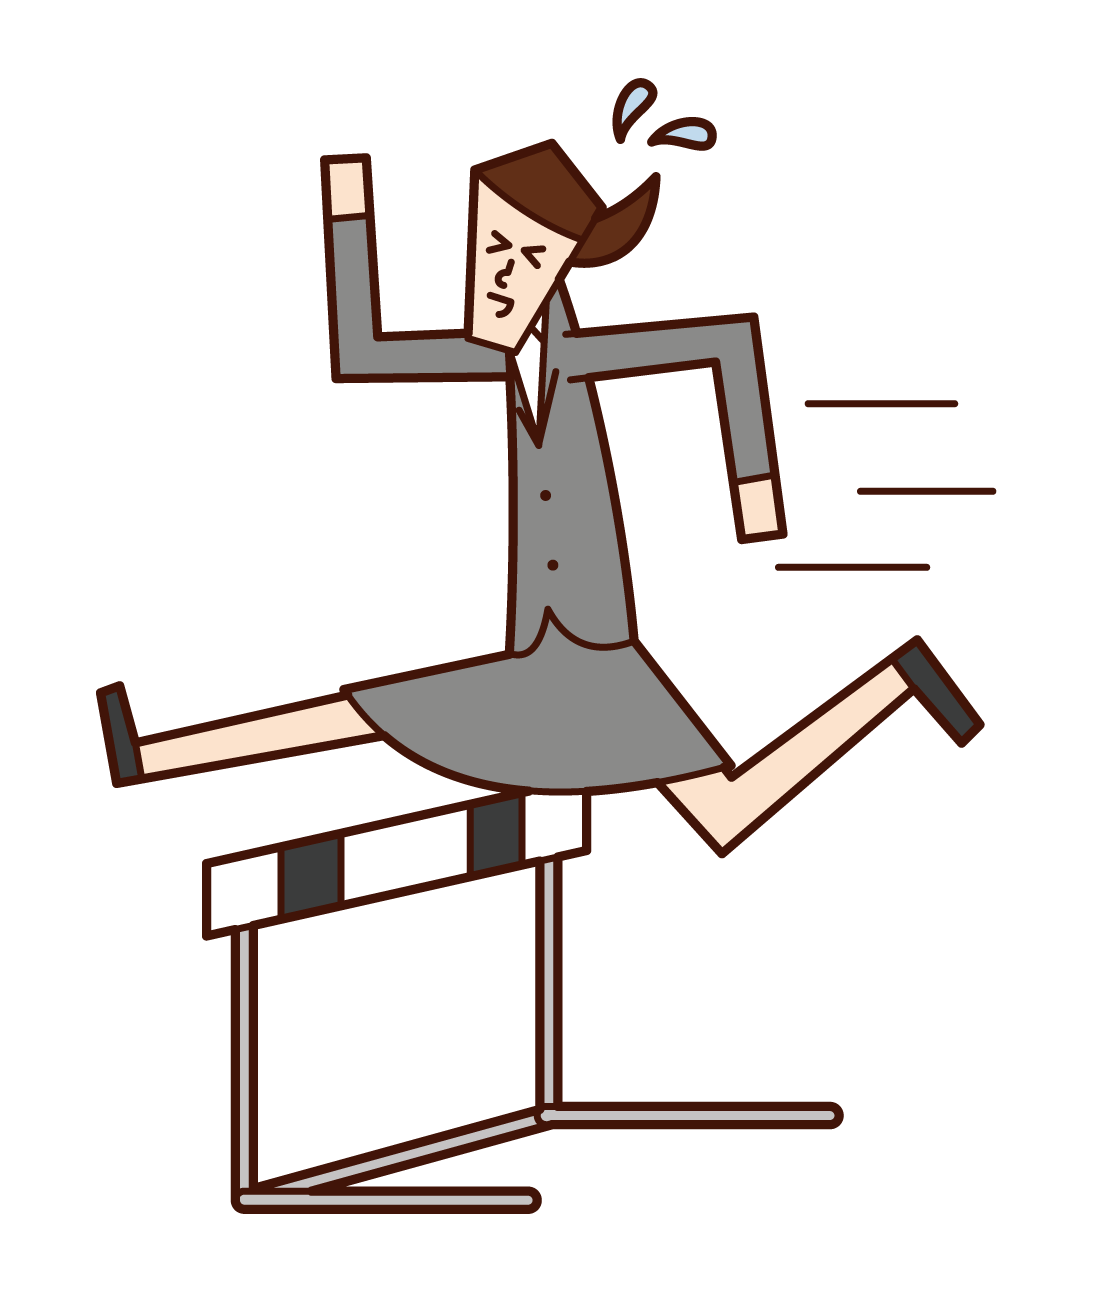 Illustration of a person (male) jumping over a hurdle